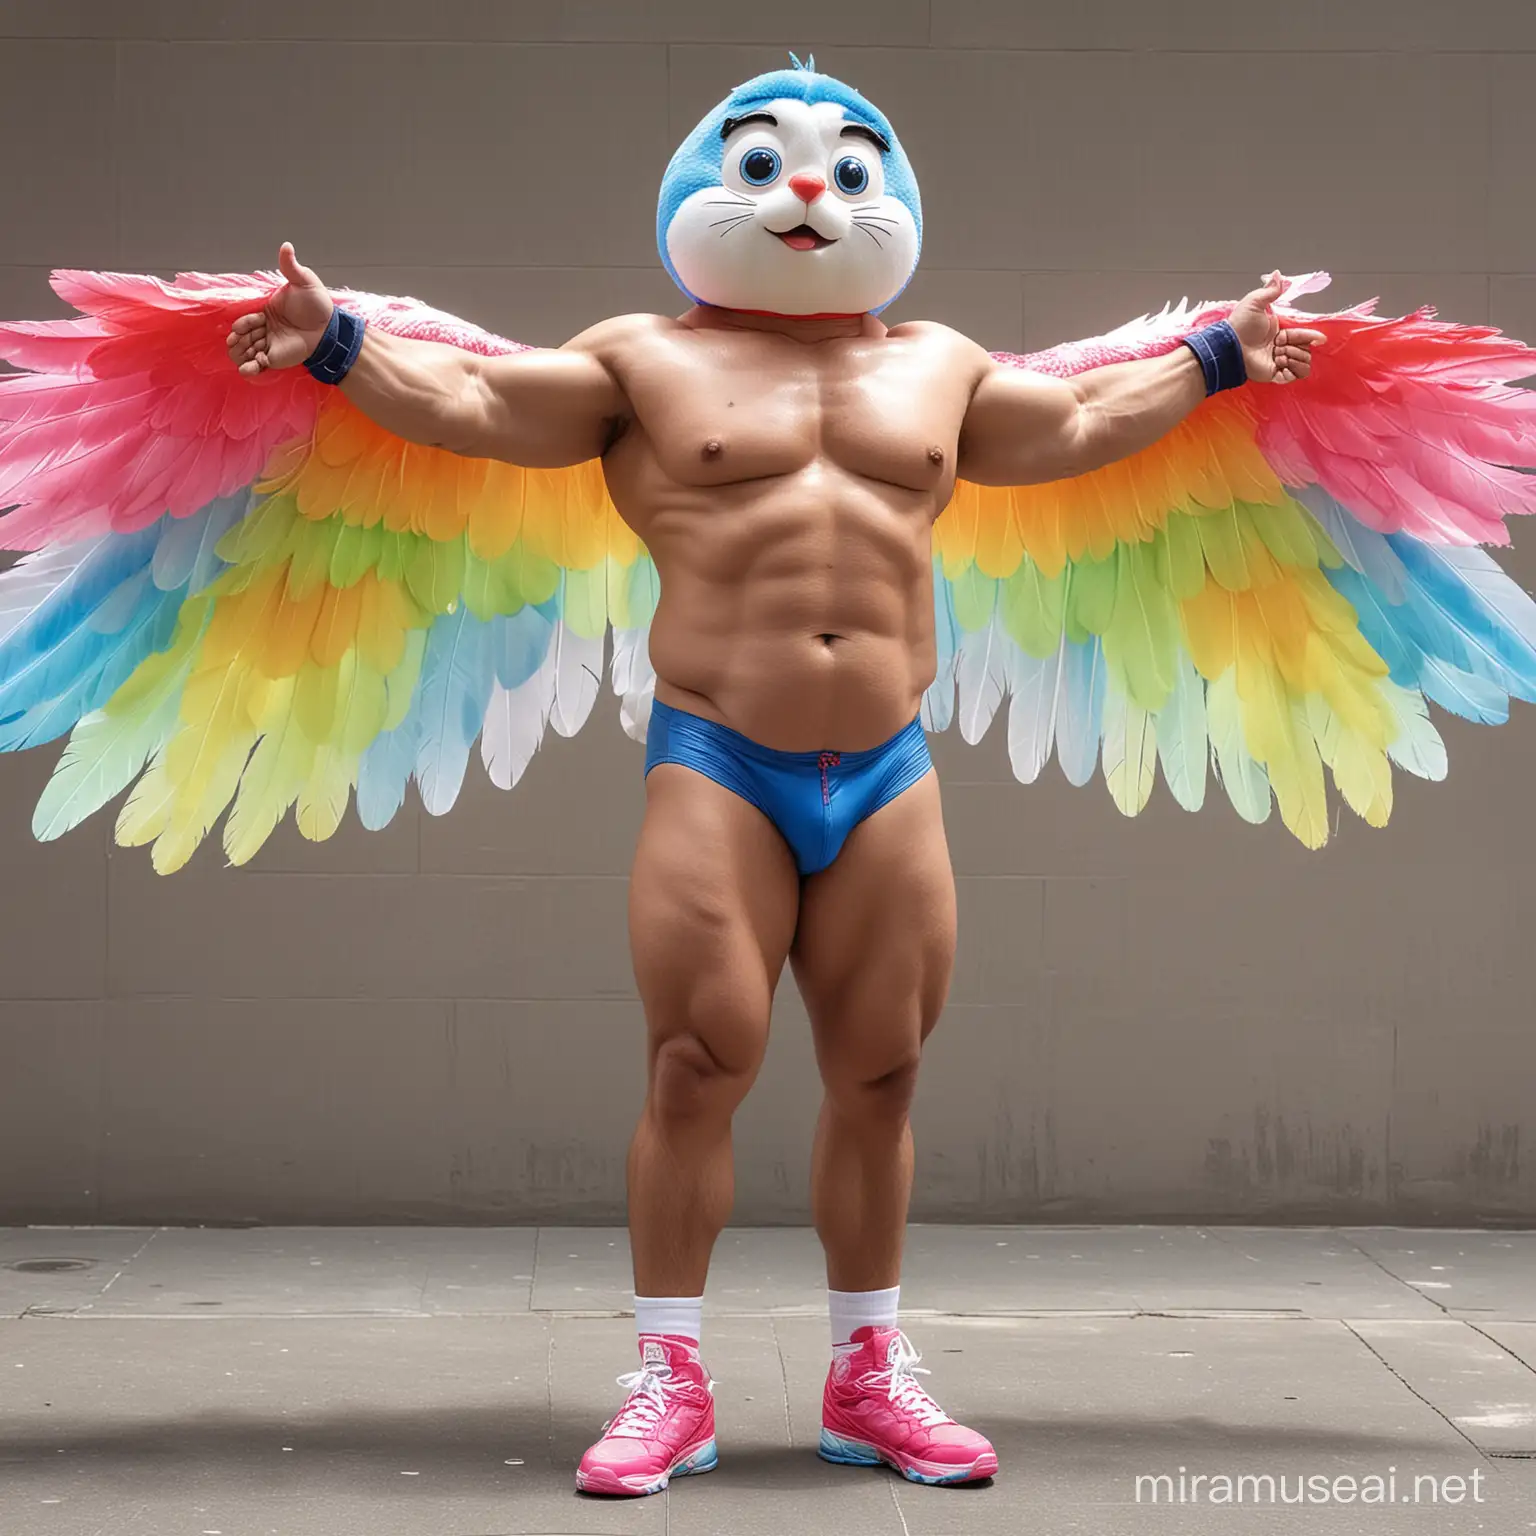 Full Body to feet Topless 30s Ultra Chunky IFBB Bodybuilder Daddy wearing Multi-Highlighter Bright Rainbow Coloured See Through Eagle Wings Shoulder Jacket Short shorts Arms Up Flexing Doraemon